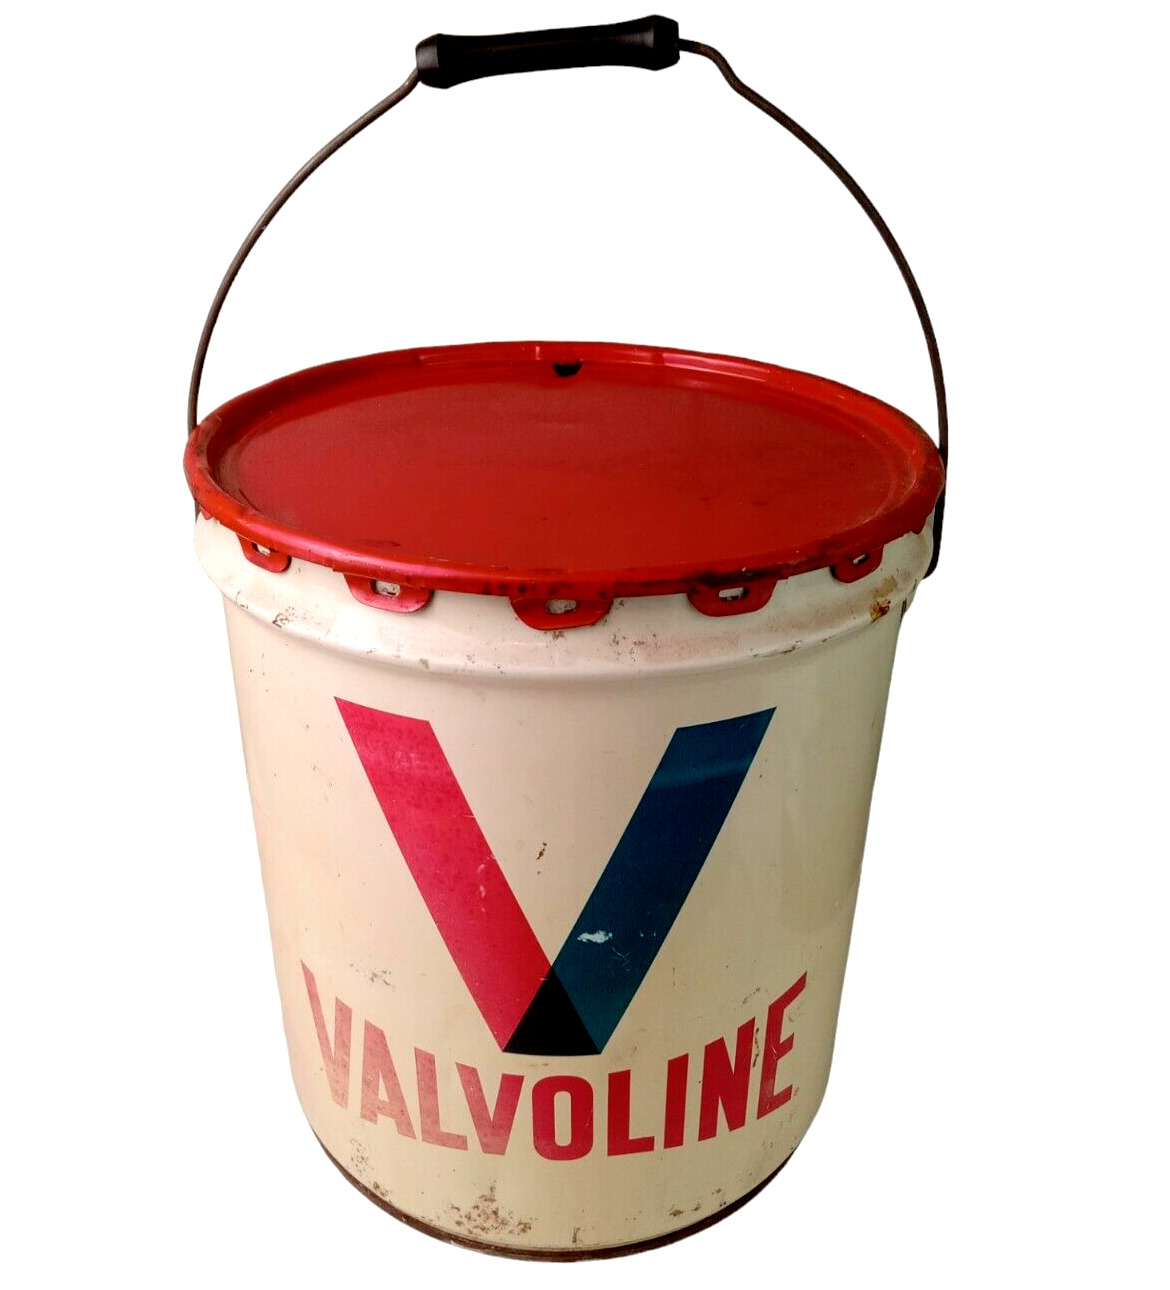 Vintage VALVOLINE 35 Lb. Oil Grease Metal Can Tin Bucket Pail with Red Lid Empty